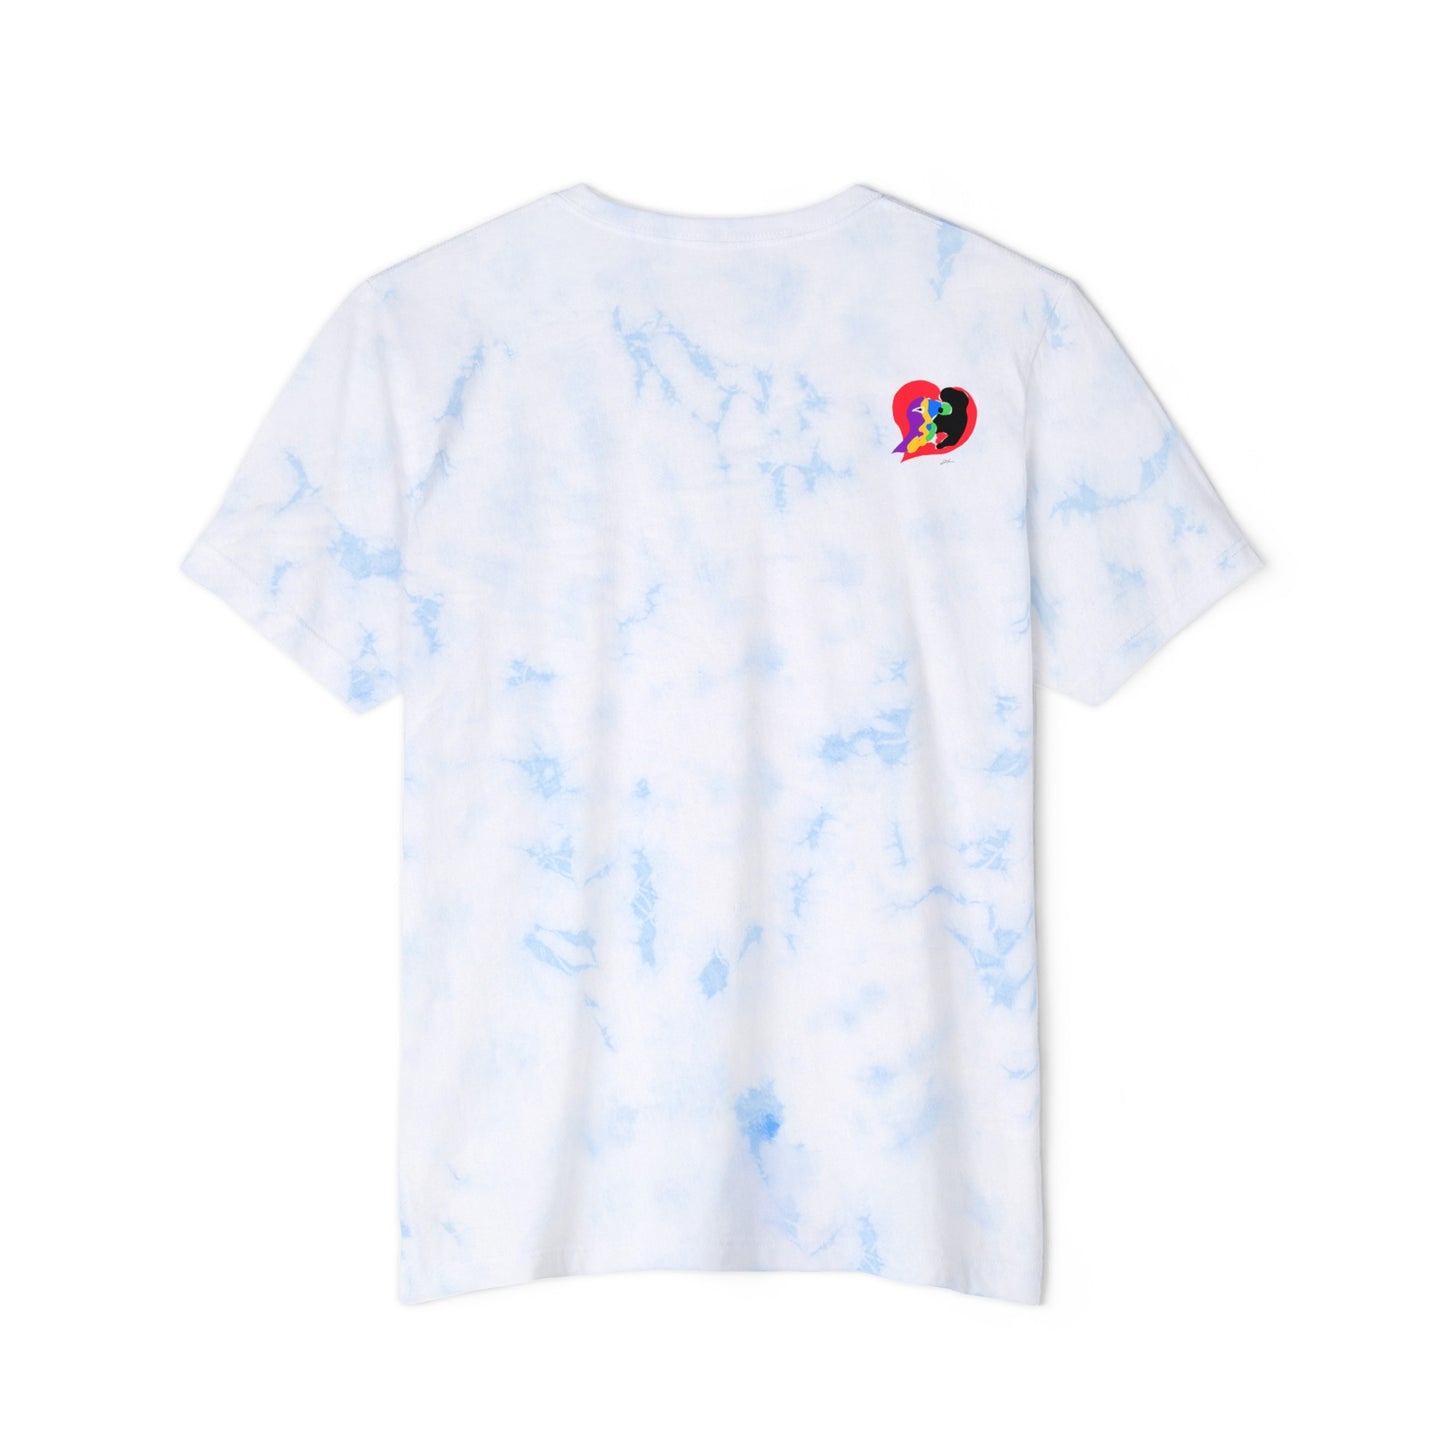 #gyat High End Tie-Dyed T-Shirt